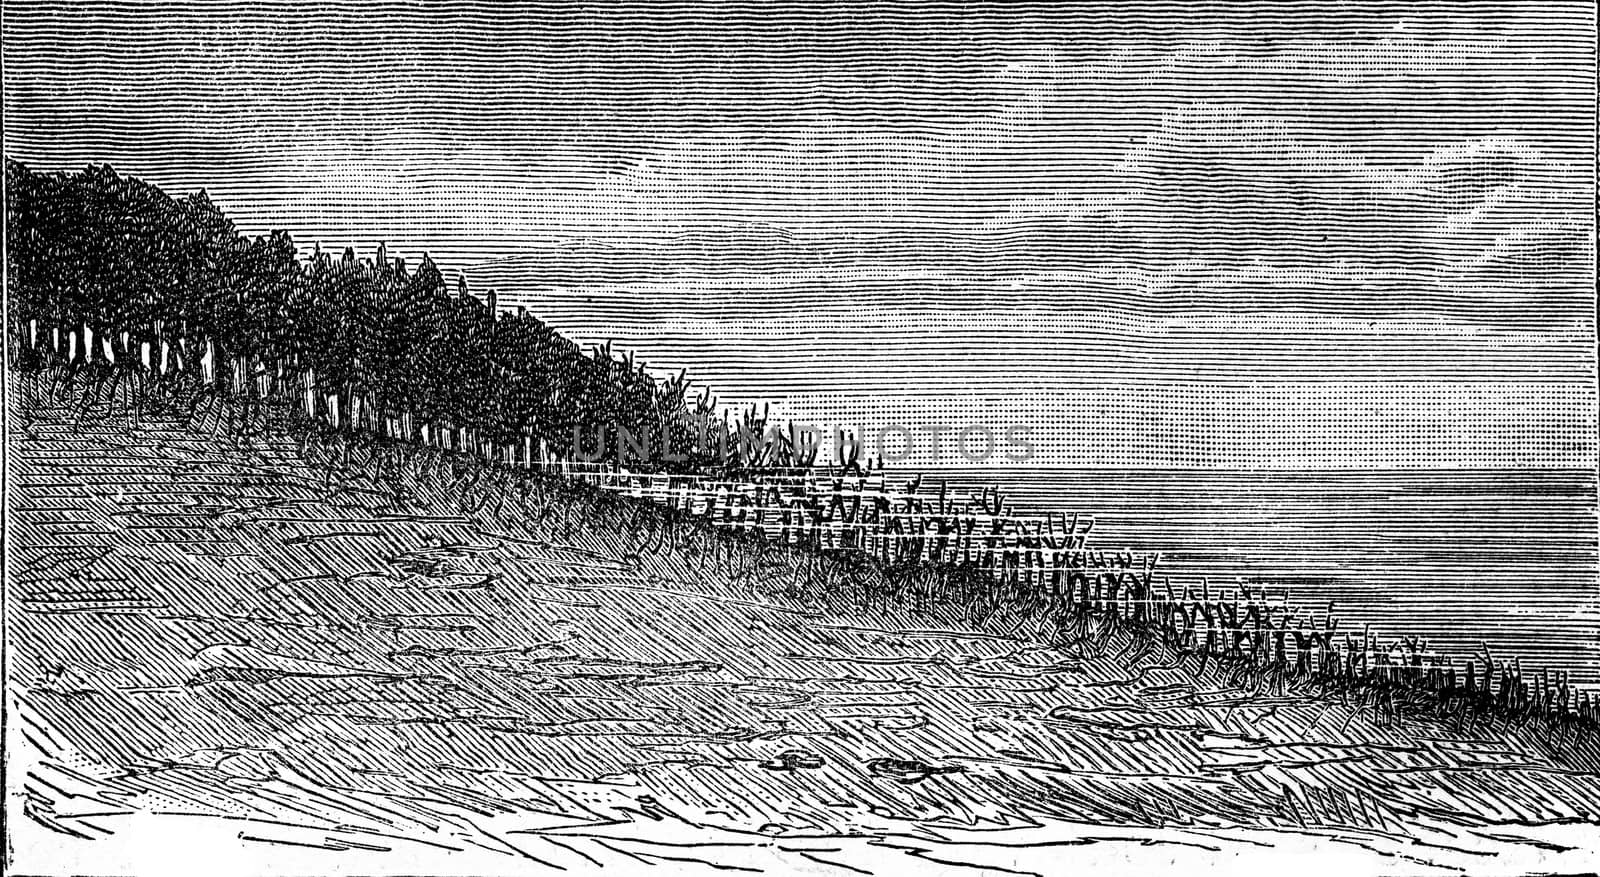 Forest being flooded on the shores of Sweden, vintage engraved illustration. Earth before man – 1886.
